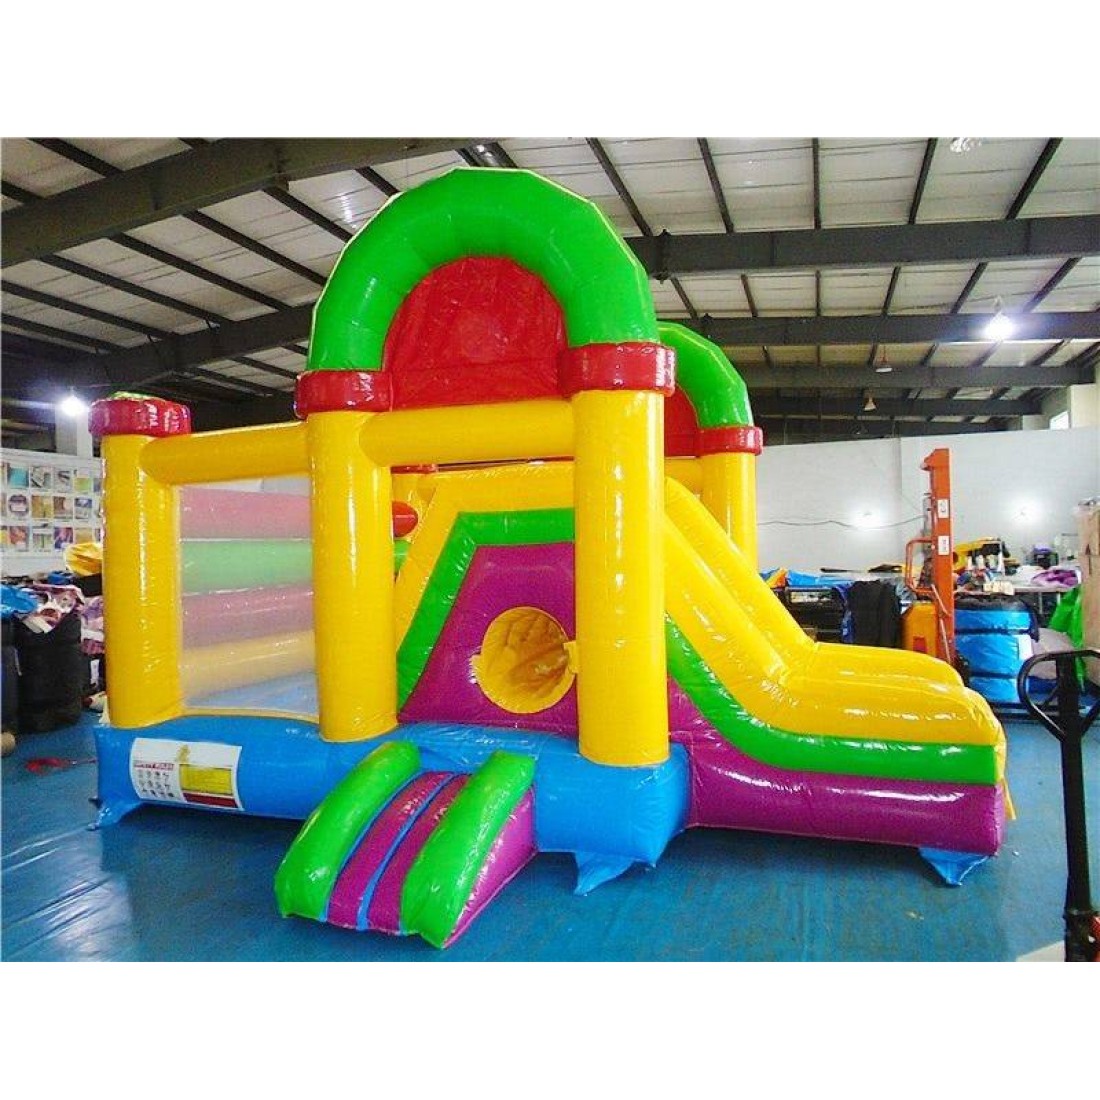 Commercial Inflatables, Cheap Commercial Inflatables For Sale.